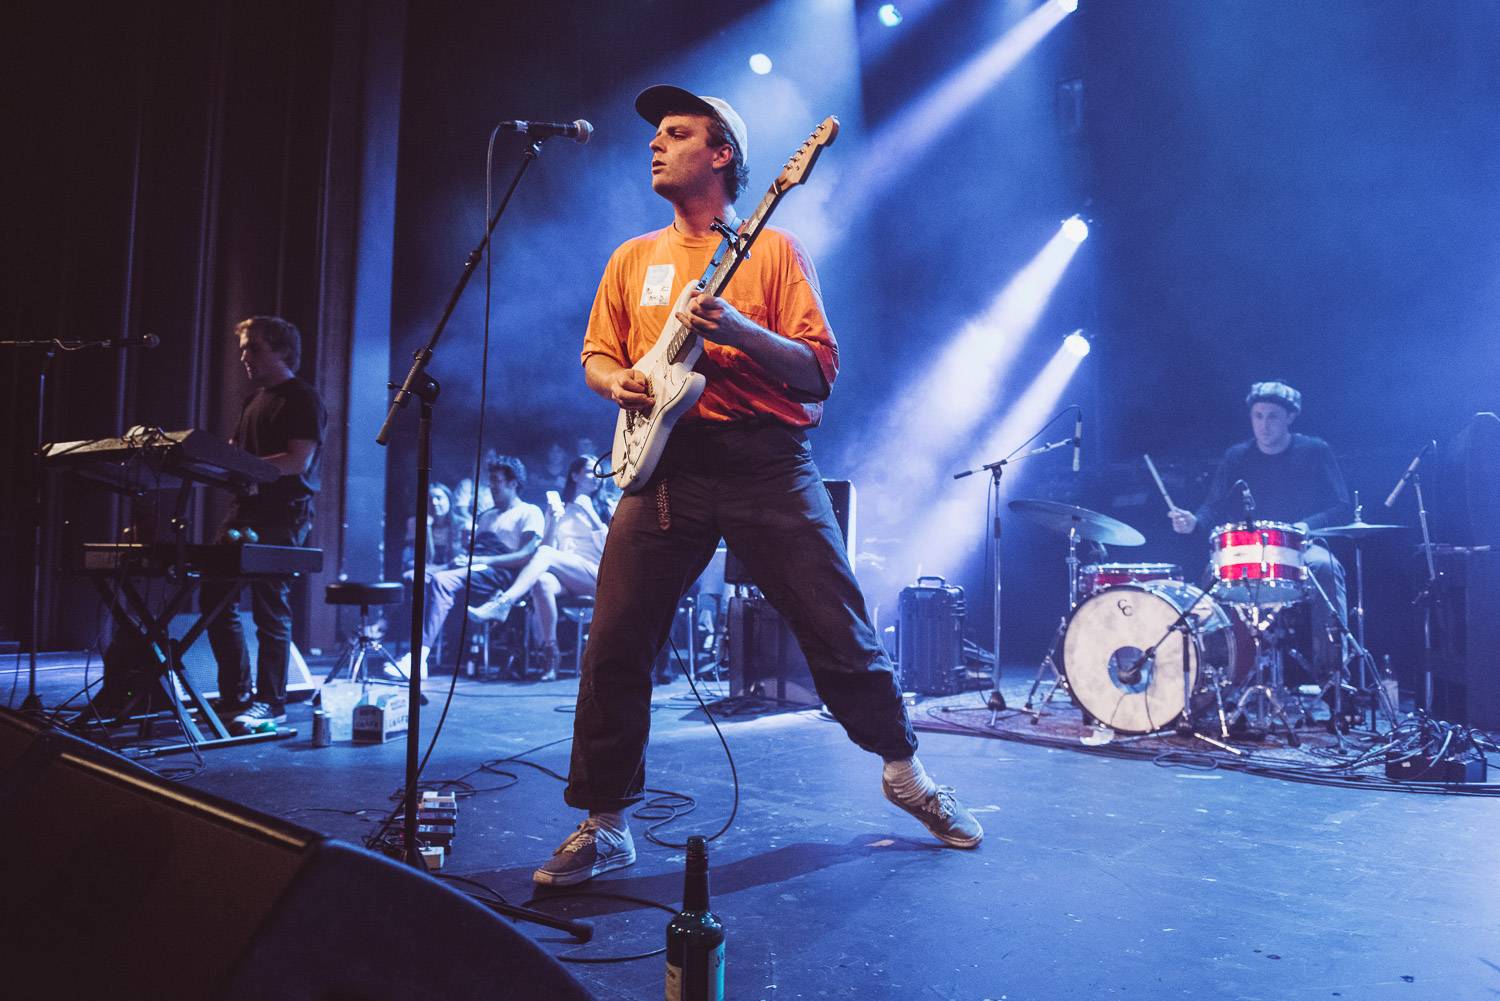 Mac DeMarco at the Vogue Theatre, Vancouver, Sept 12 2017. Pavel Boiko photo.